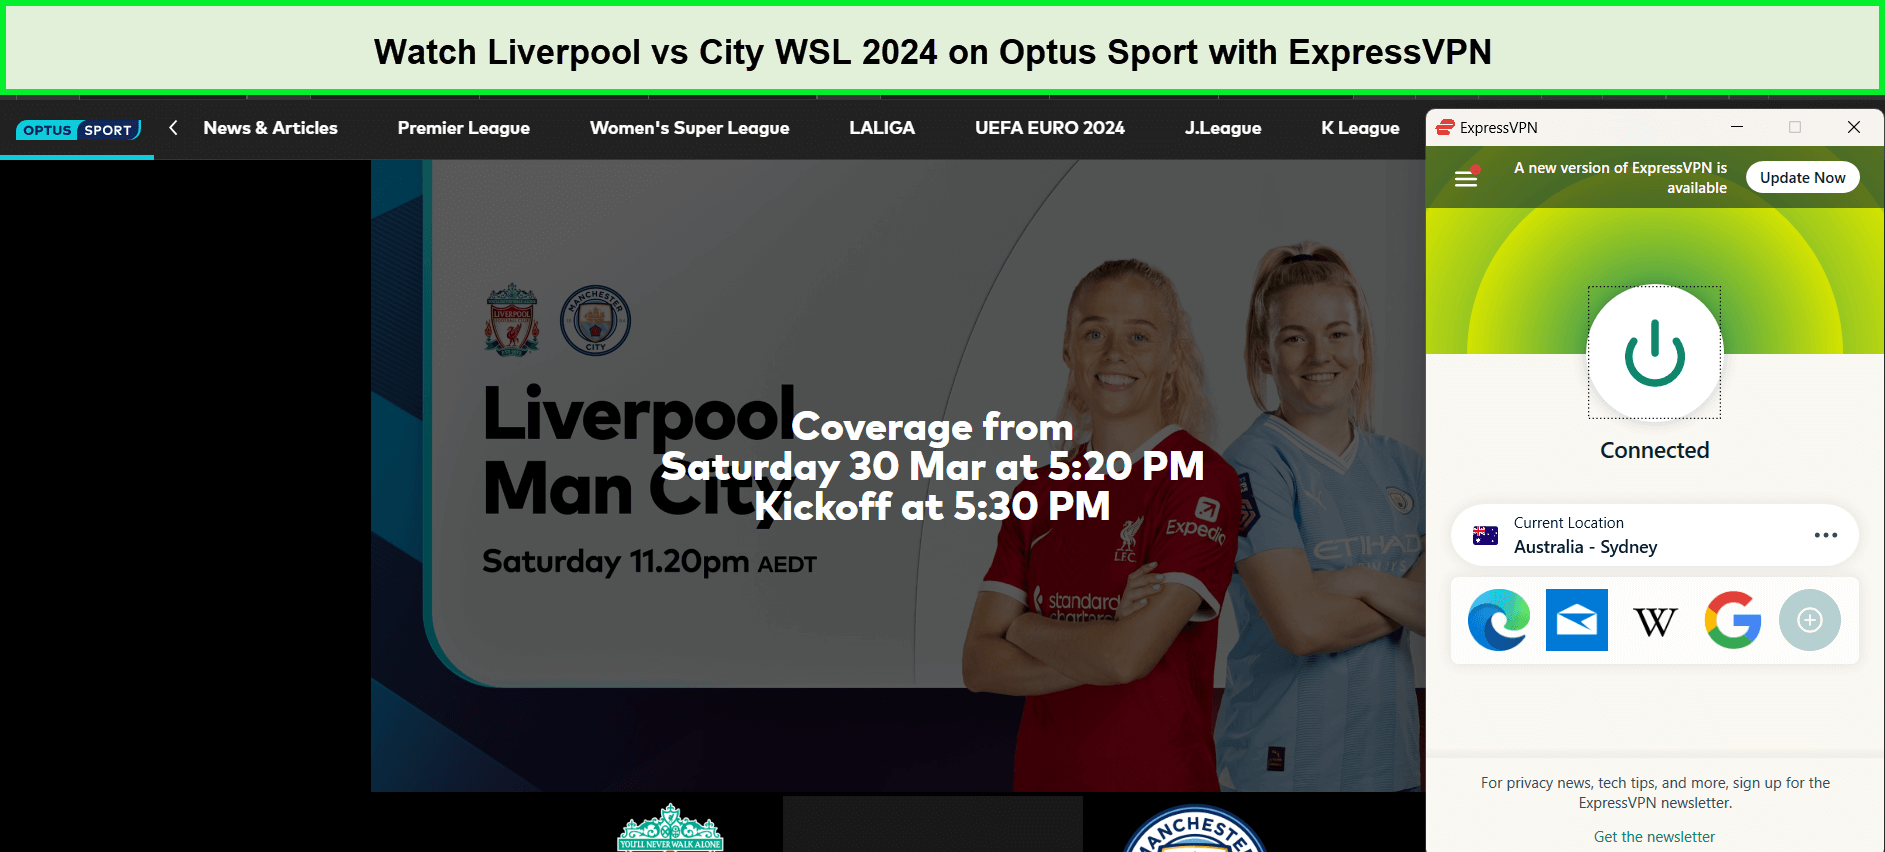 watch-Liverpool-vs-City-WSL-2024-in-Italy-on-Optus-Sport-with-expressvpn